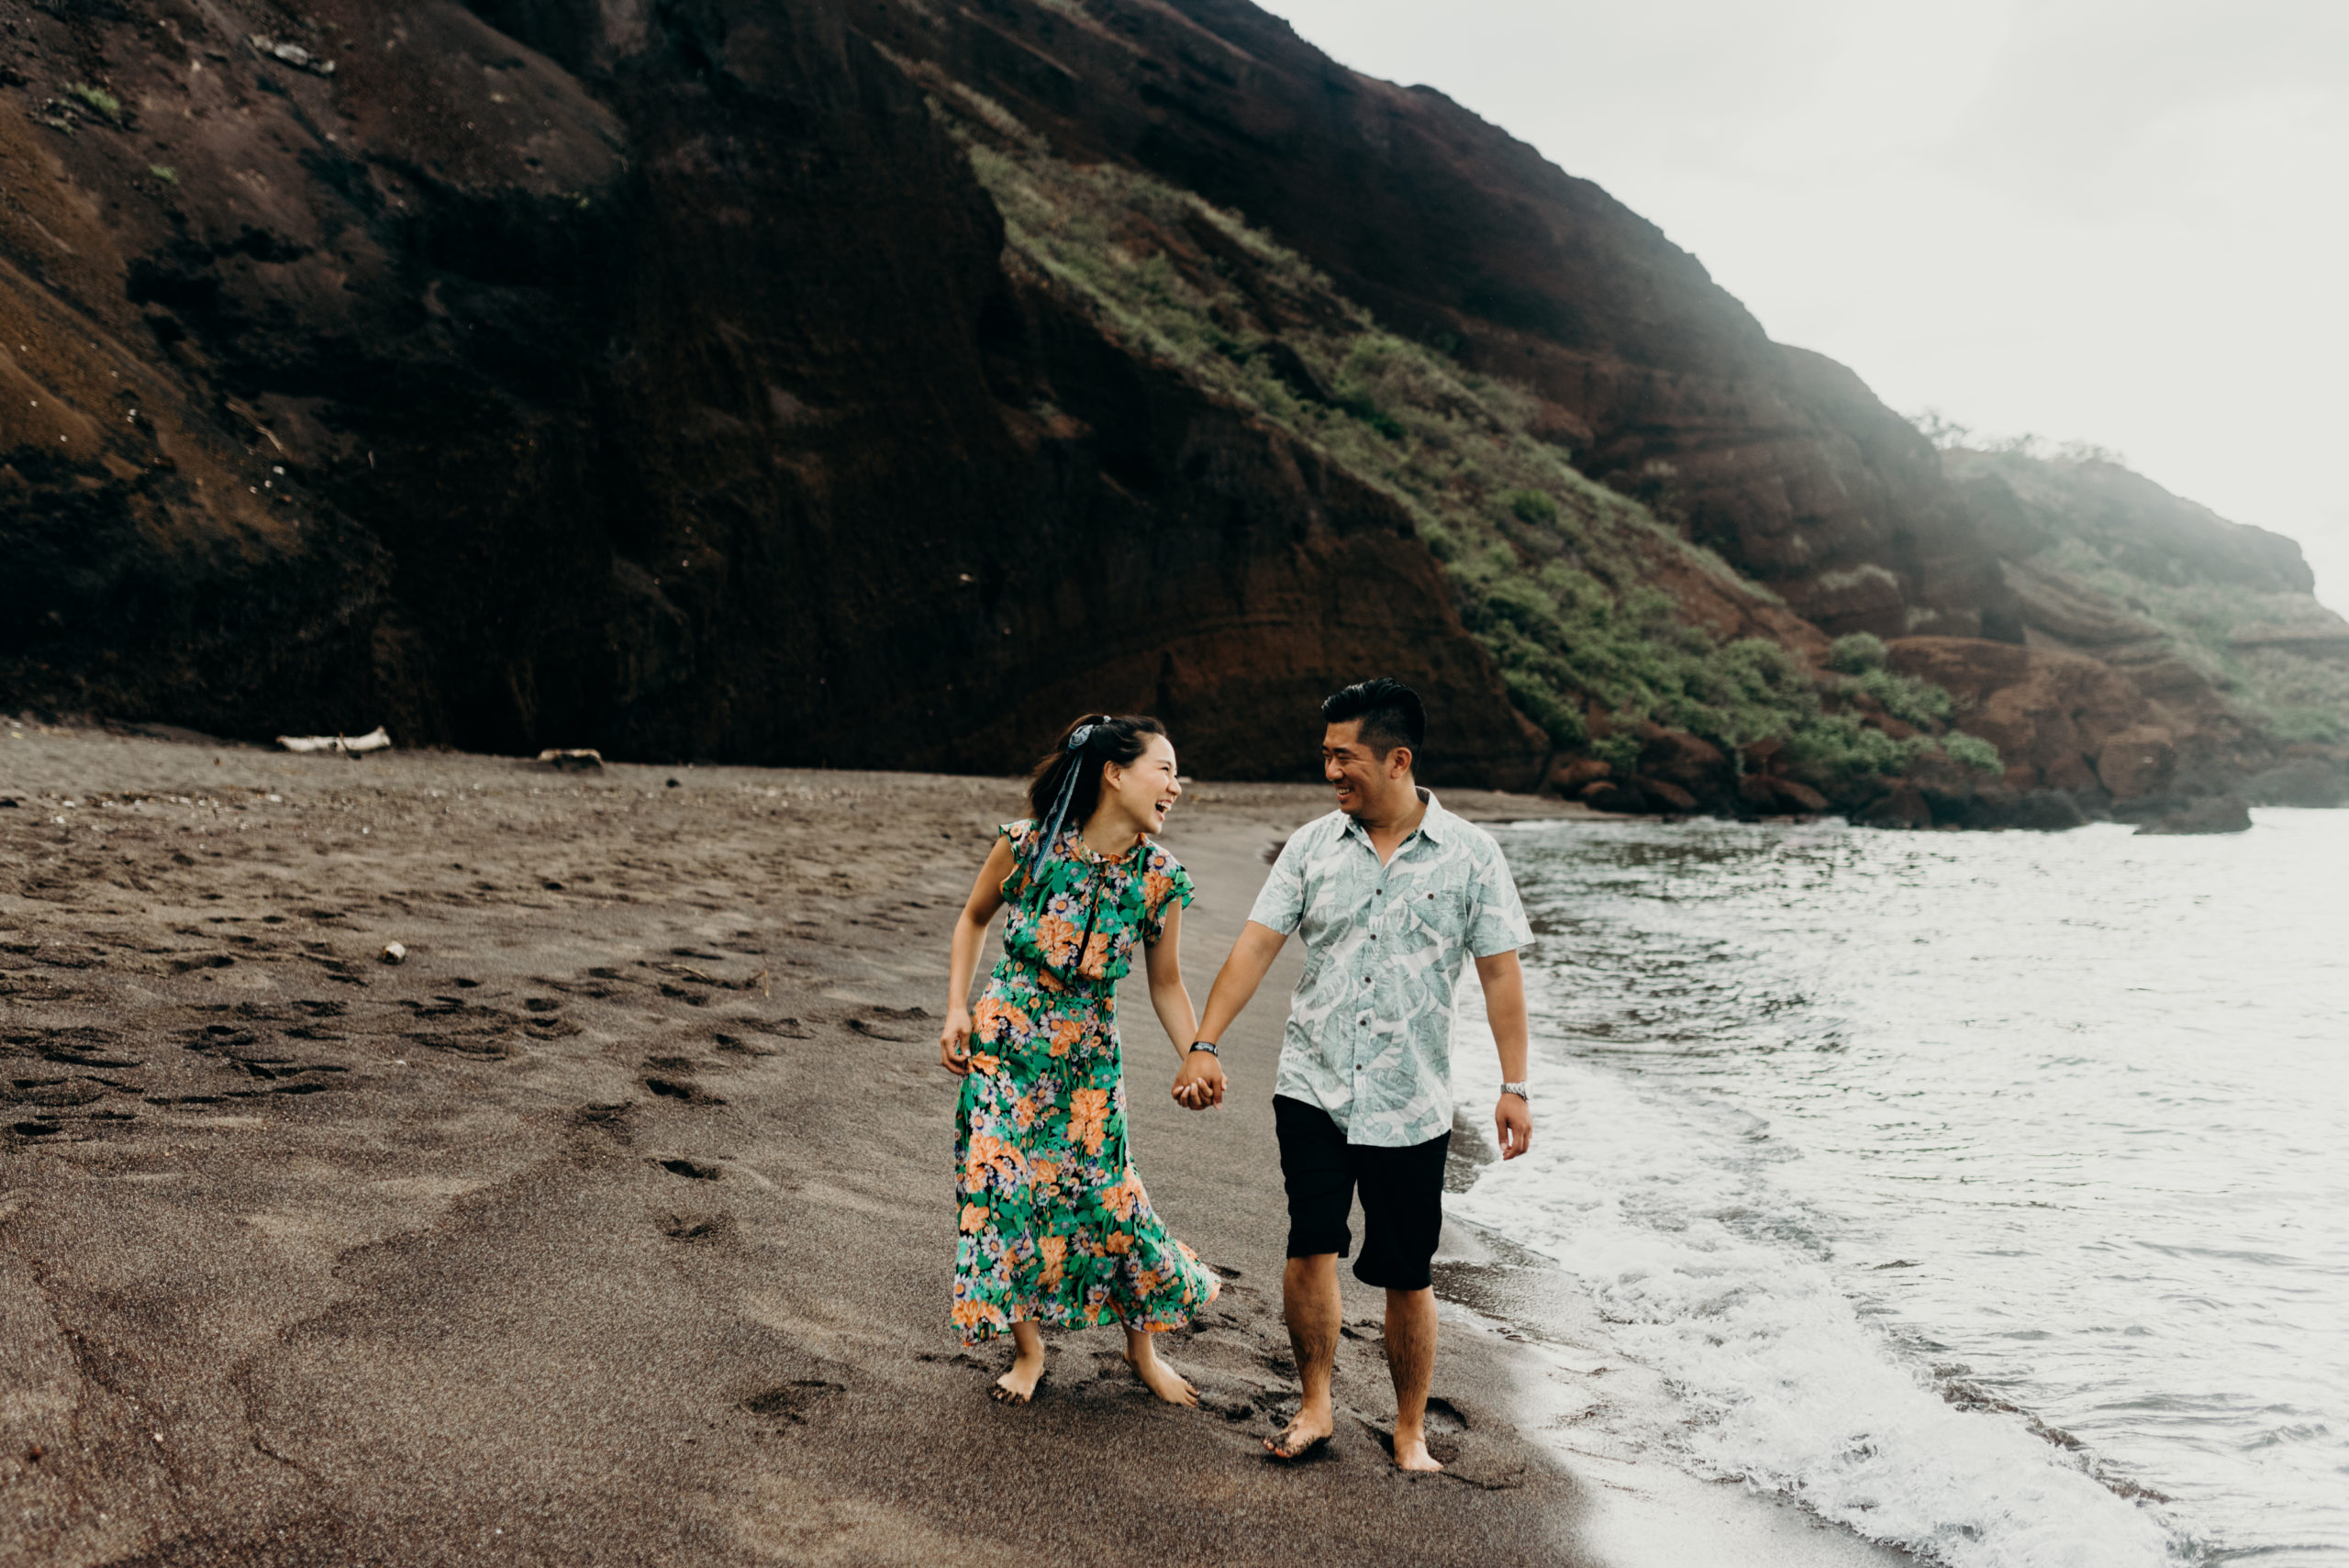 How to Travel to Hawaii on a Budget